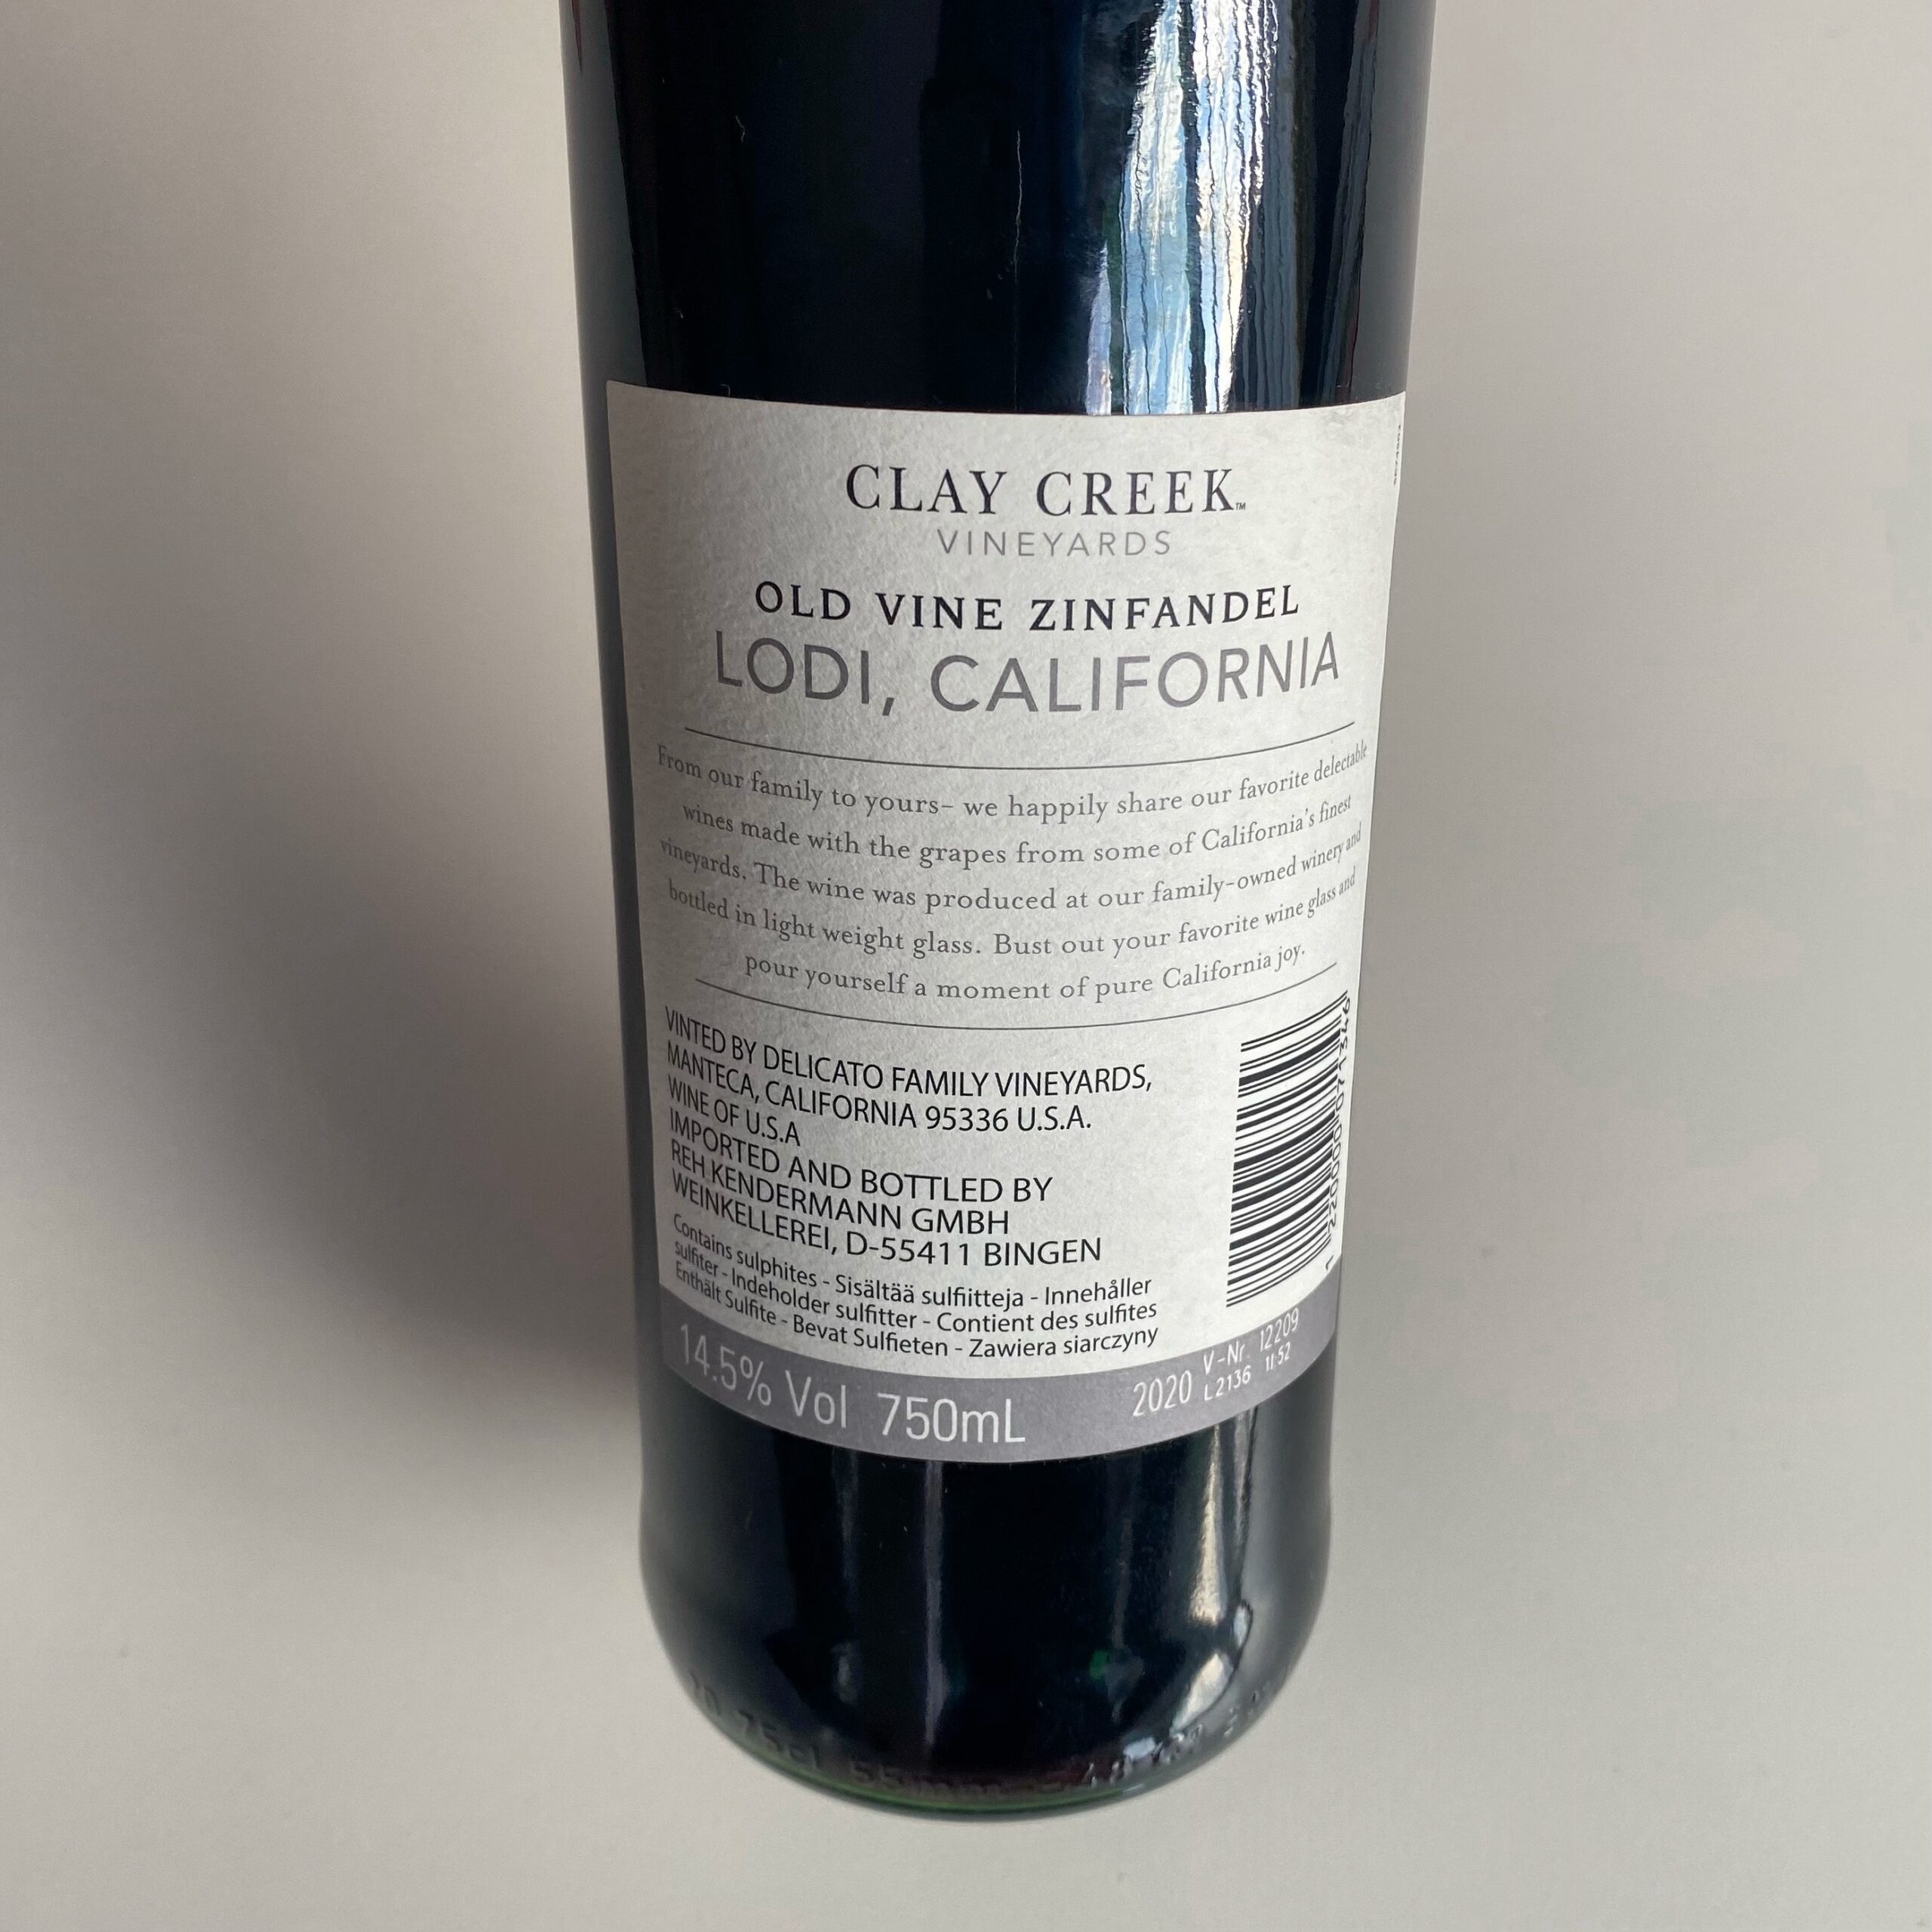 Introducing Clay Creek Zinfandel: A Product of Lodi’s Unique Terroir and Climatic Conditions